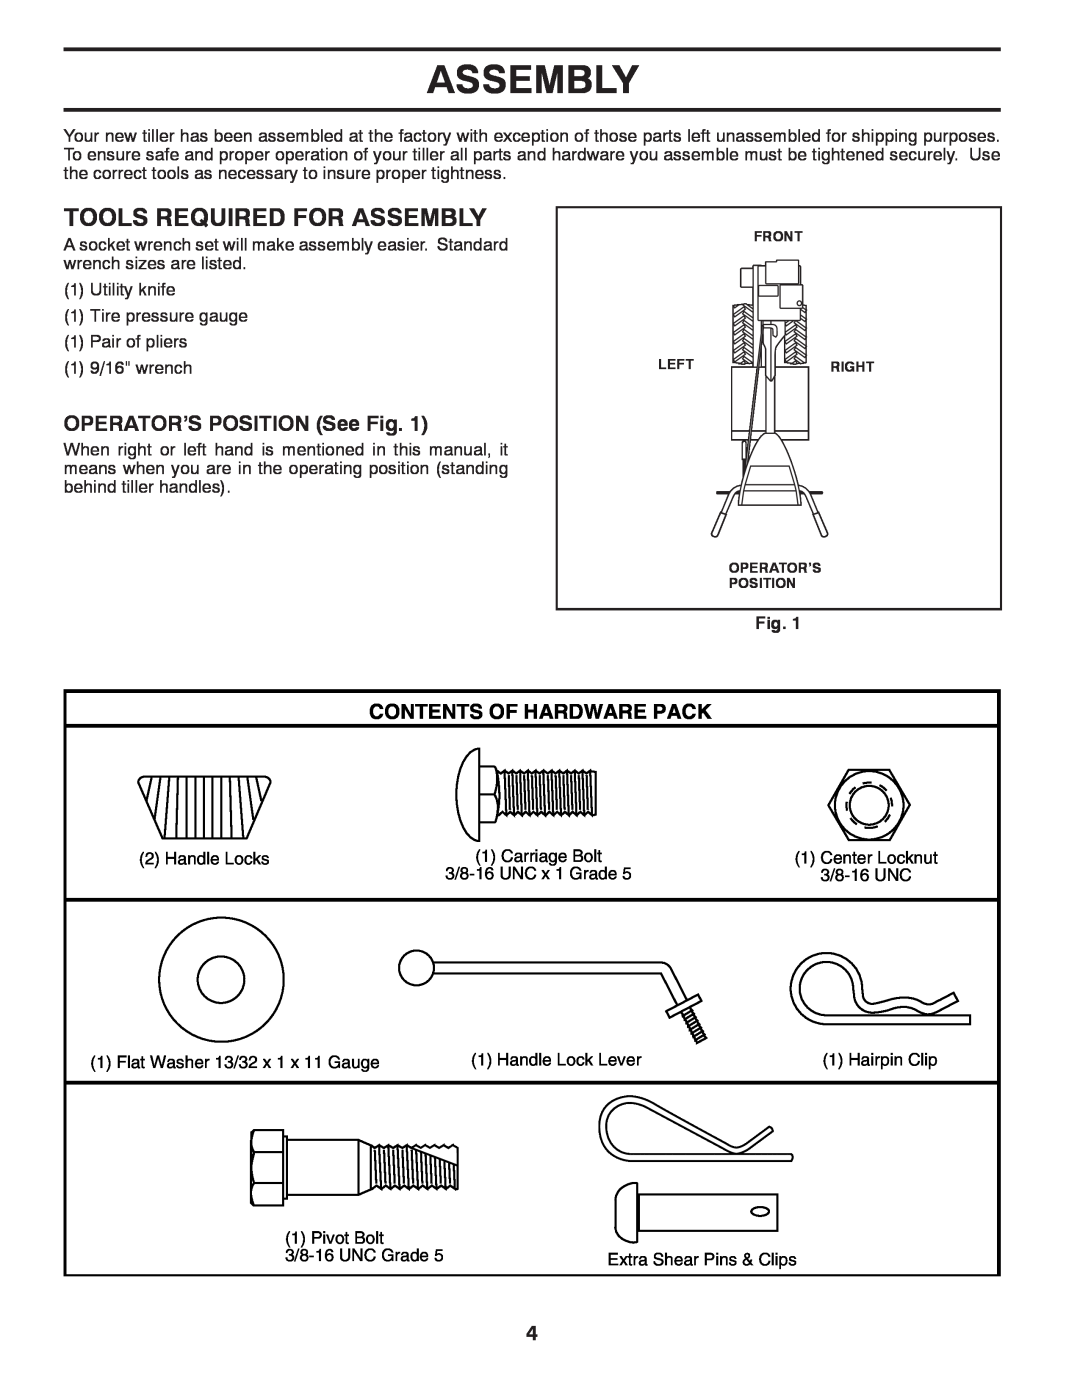 Poulan PRRT9000 warranty Tools Required For Assembly, OPERATOR’S POSITION See Fig, Contents Of Hardware Pack 